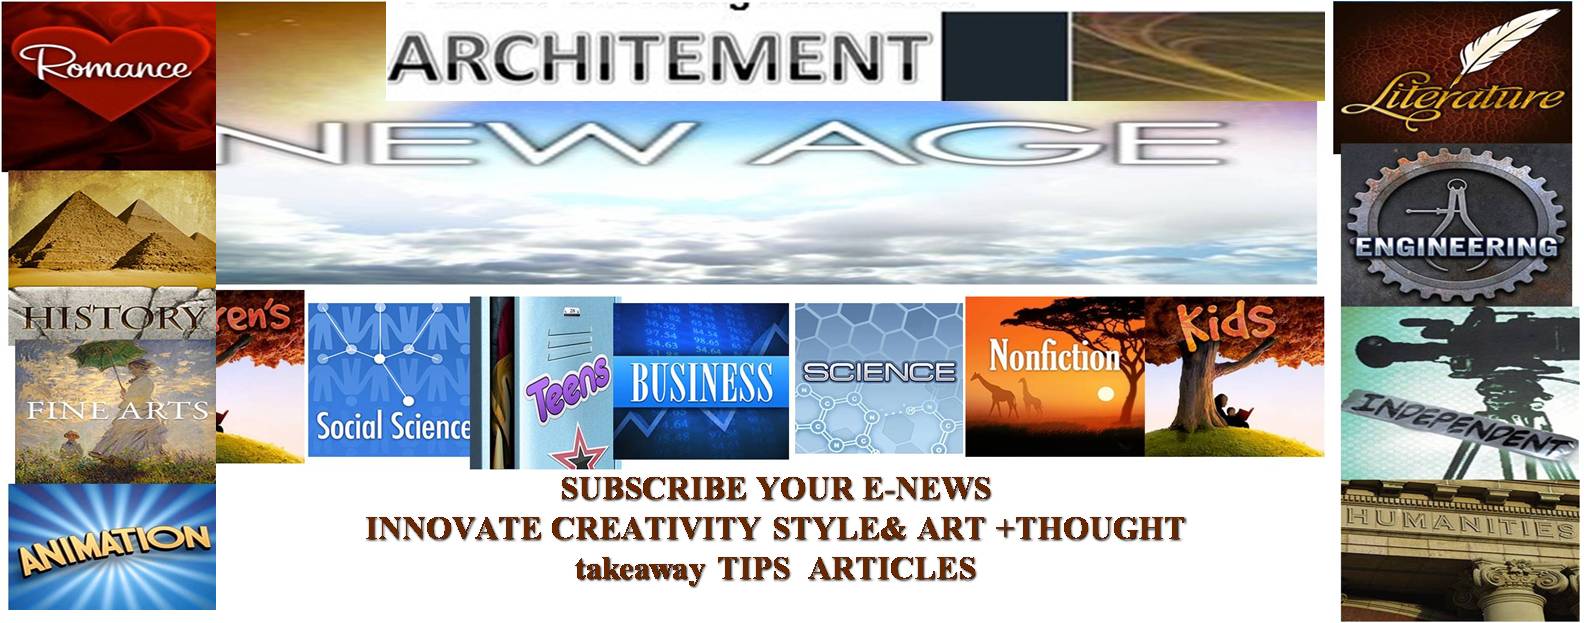 ARCHITAMENT E-NEWS VISIONARY KEYNOTES-ARTICLES,INTERACTIVE PRESENTATIONS,TAKEAWAY TIPS&GUIDES AND MUCH MORE!!!